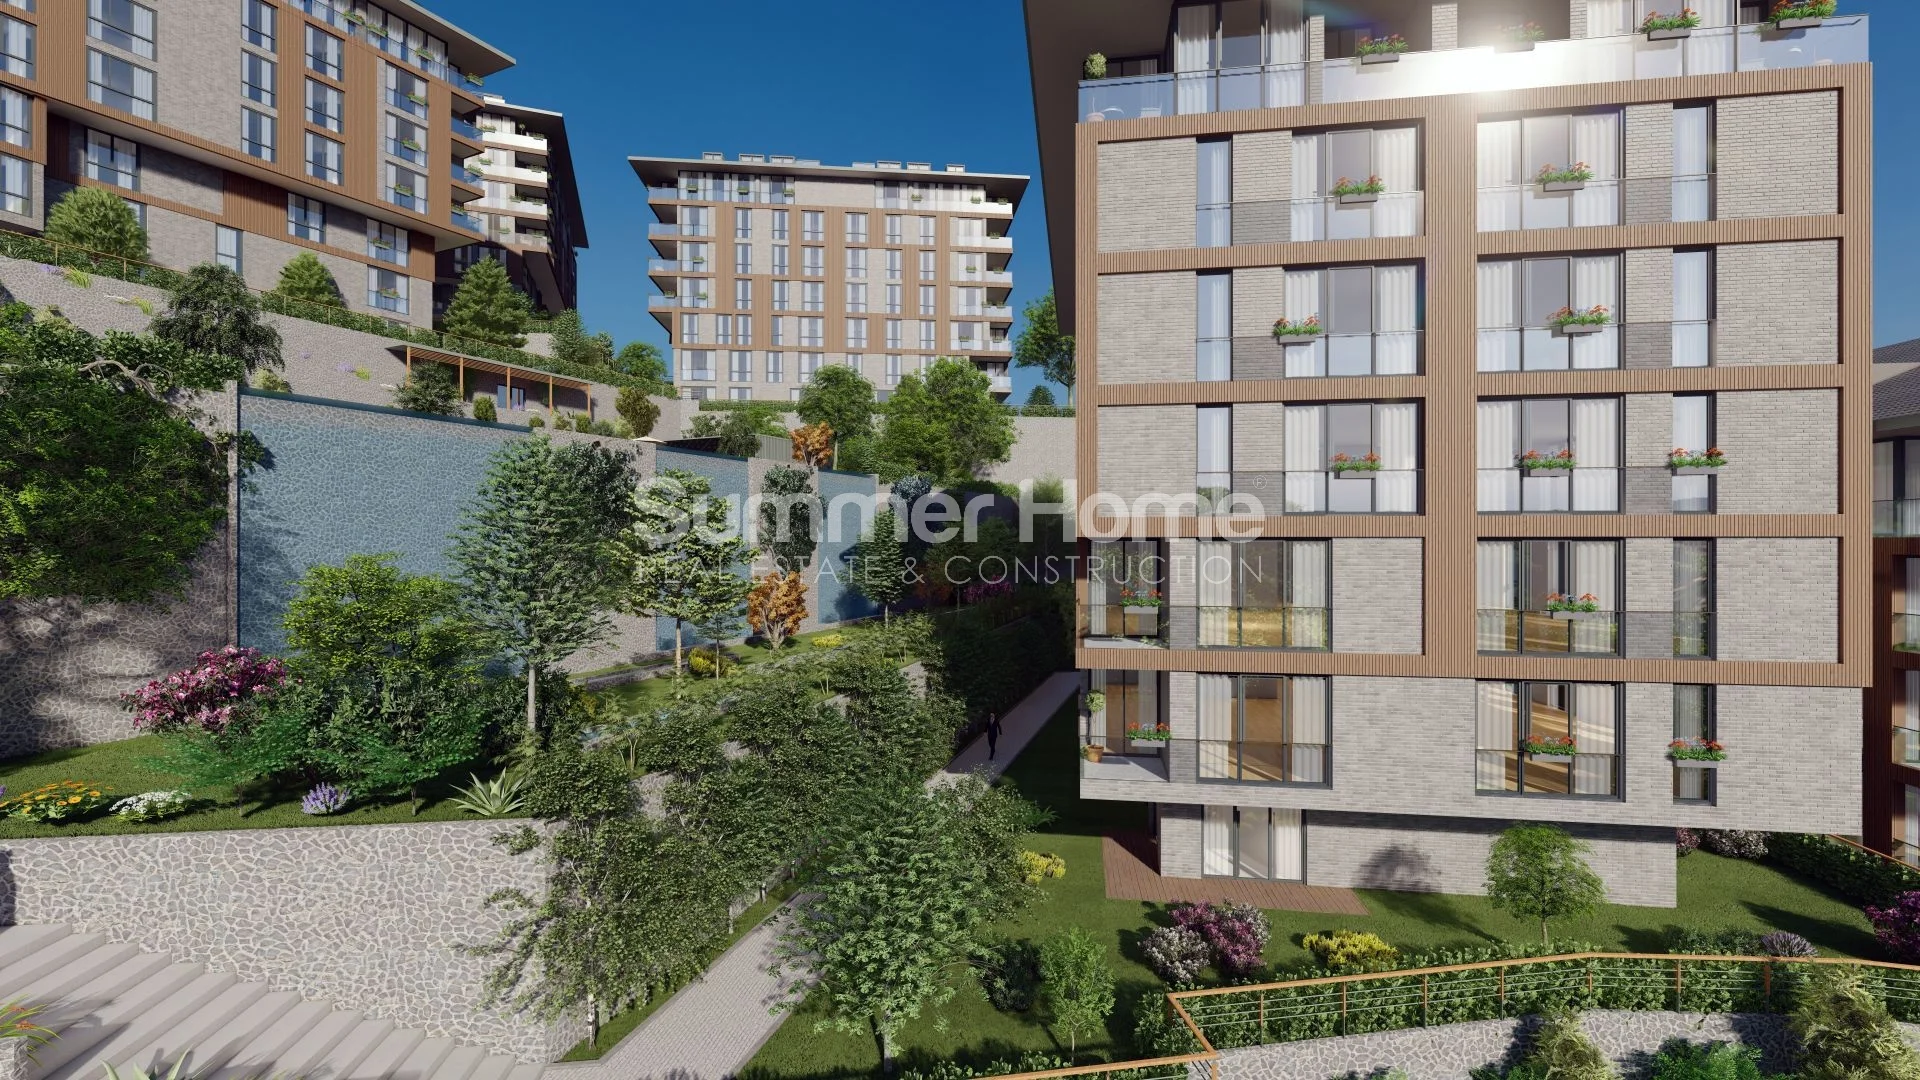 Fabulous apartments situated in Uskudar district of Istanbul General - 17